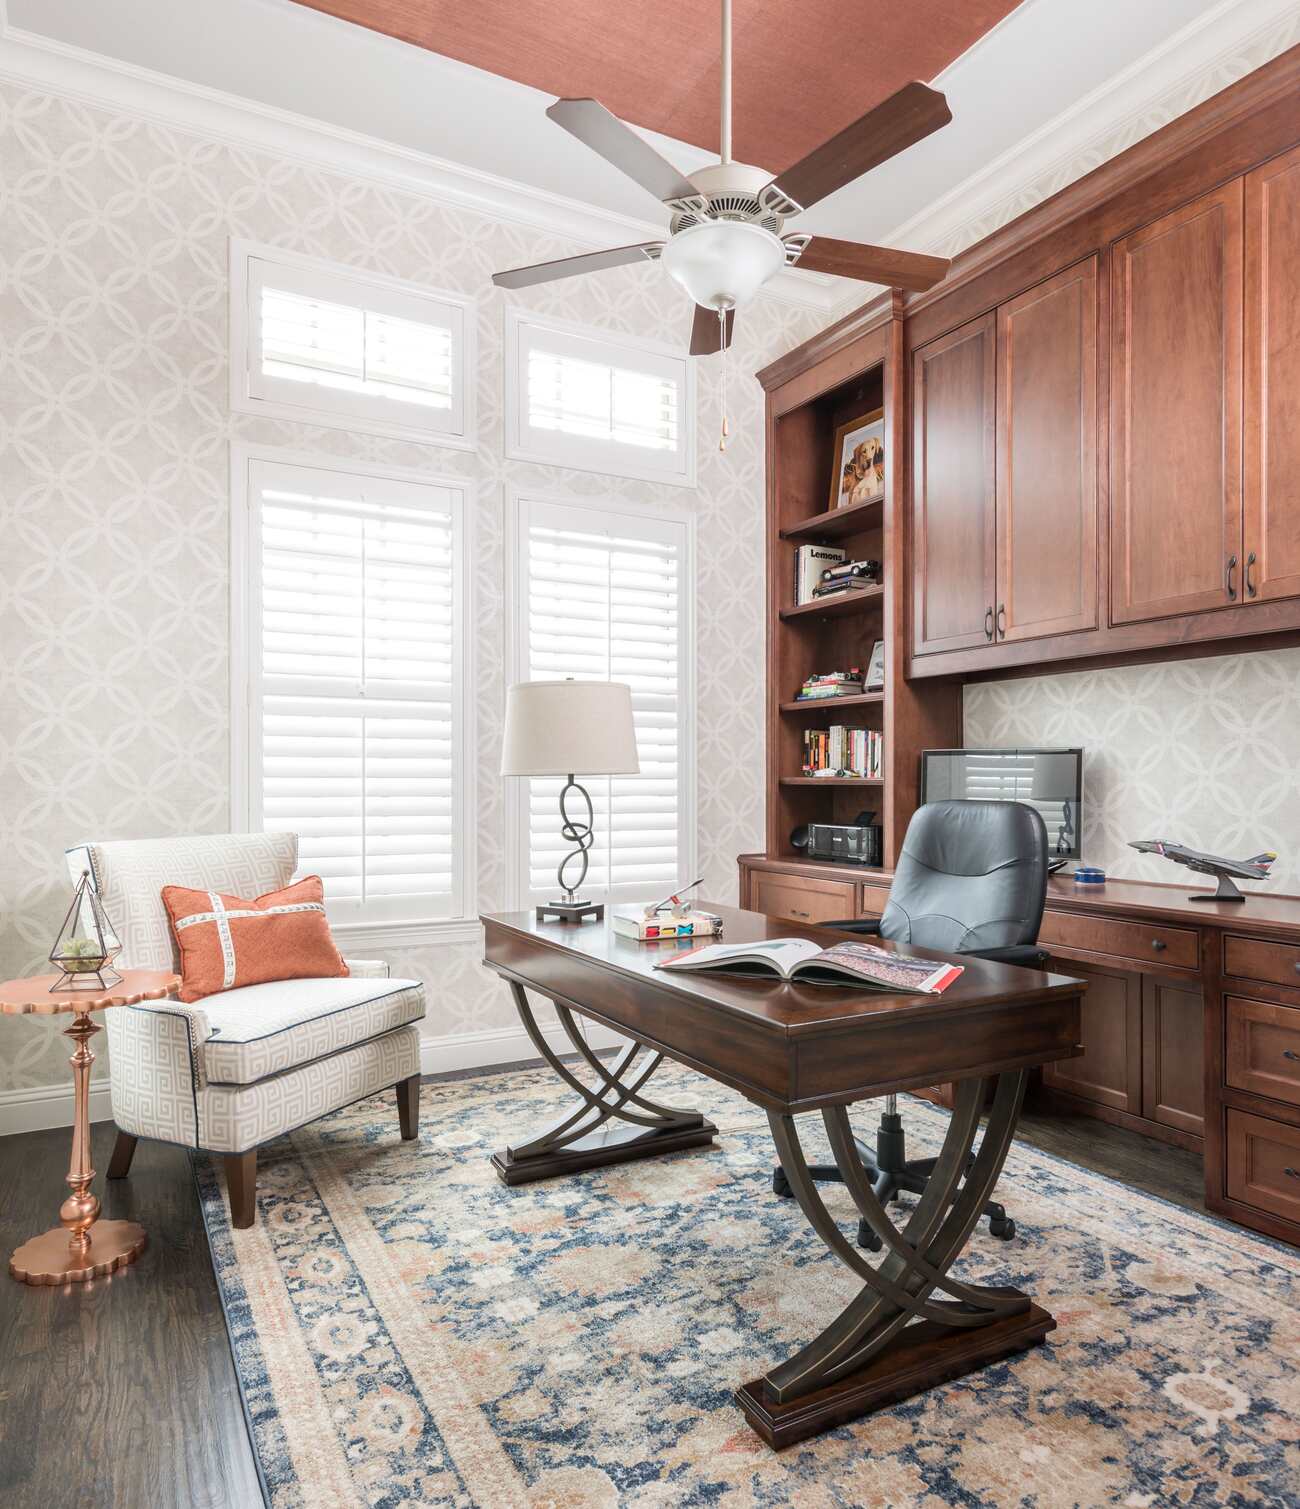 A cozy home office with a stylish desk and a ceiling fan, creating a comfortable and productive workspace